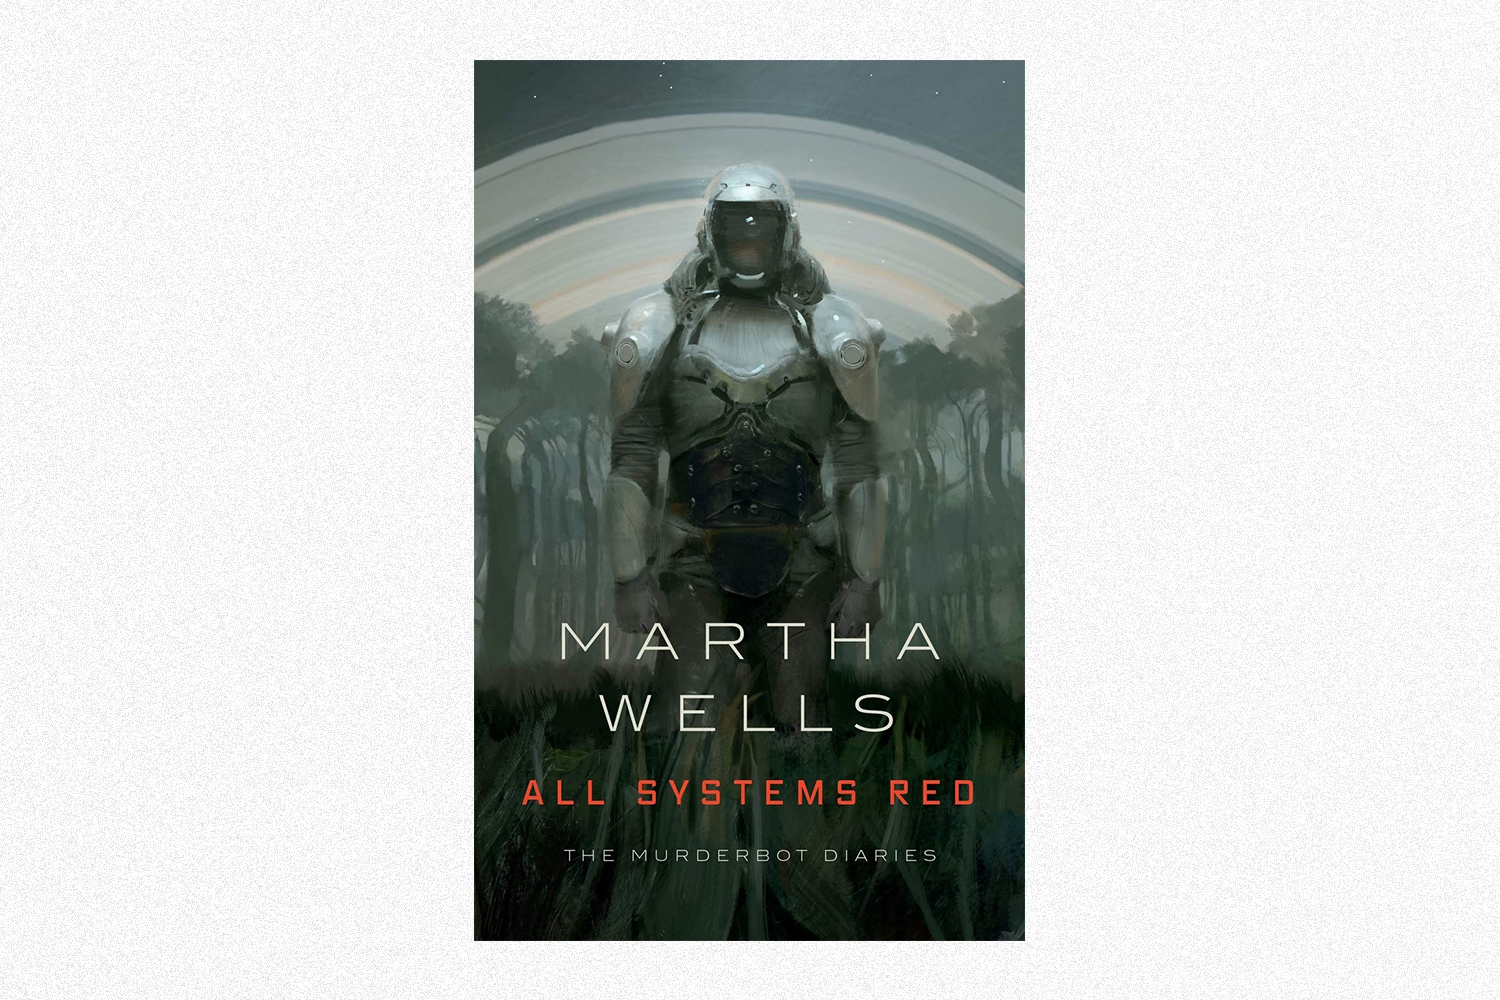 The book cover for All Systems Red by Martha Wells